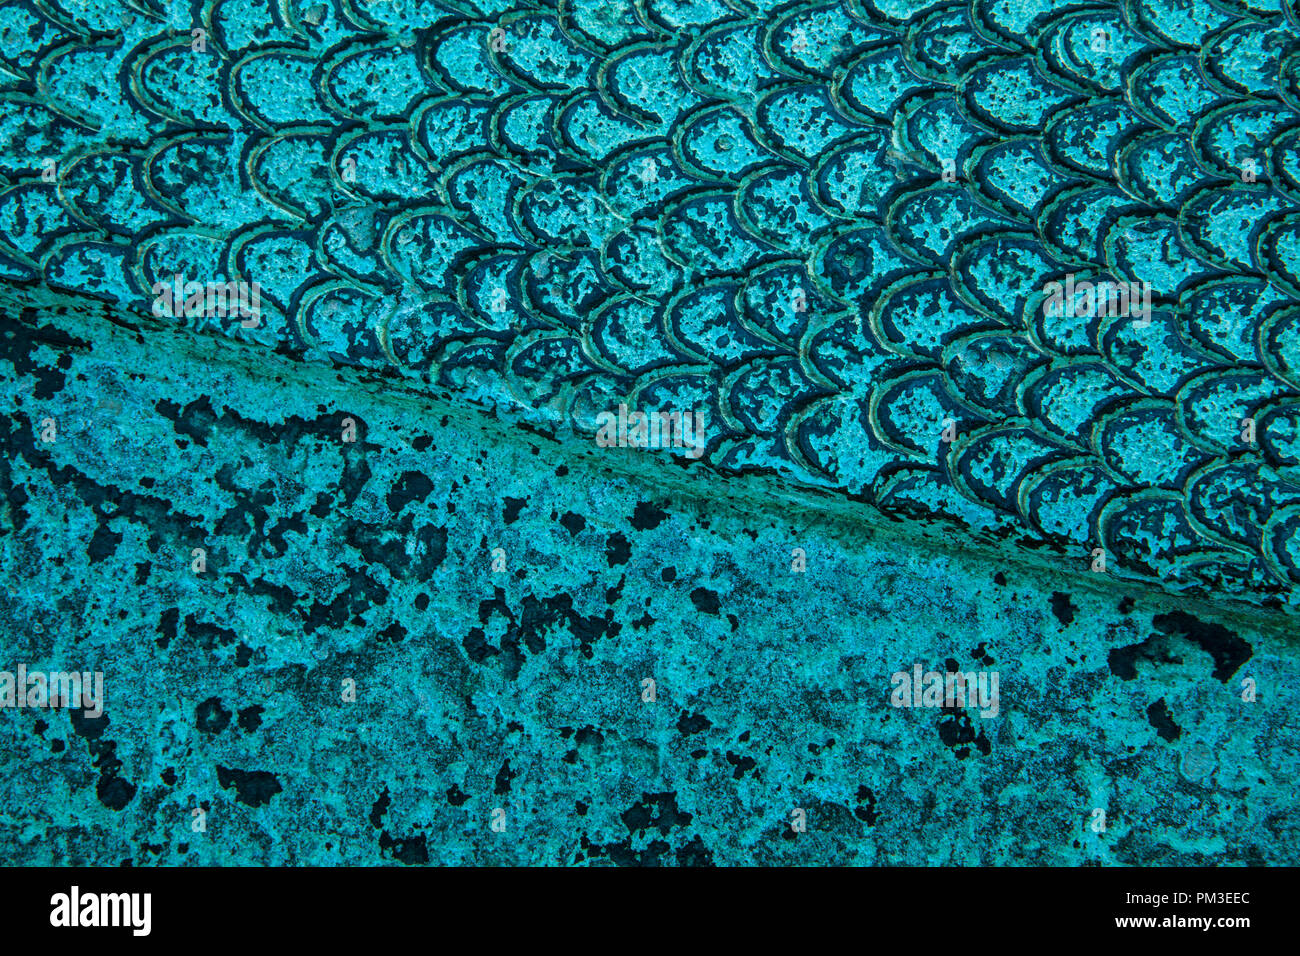 Background image of scratched antique copper vessel surface texture. Stock Photo